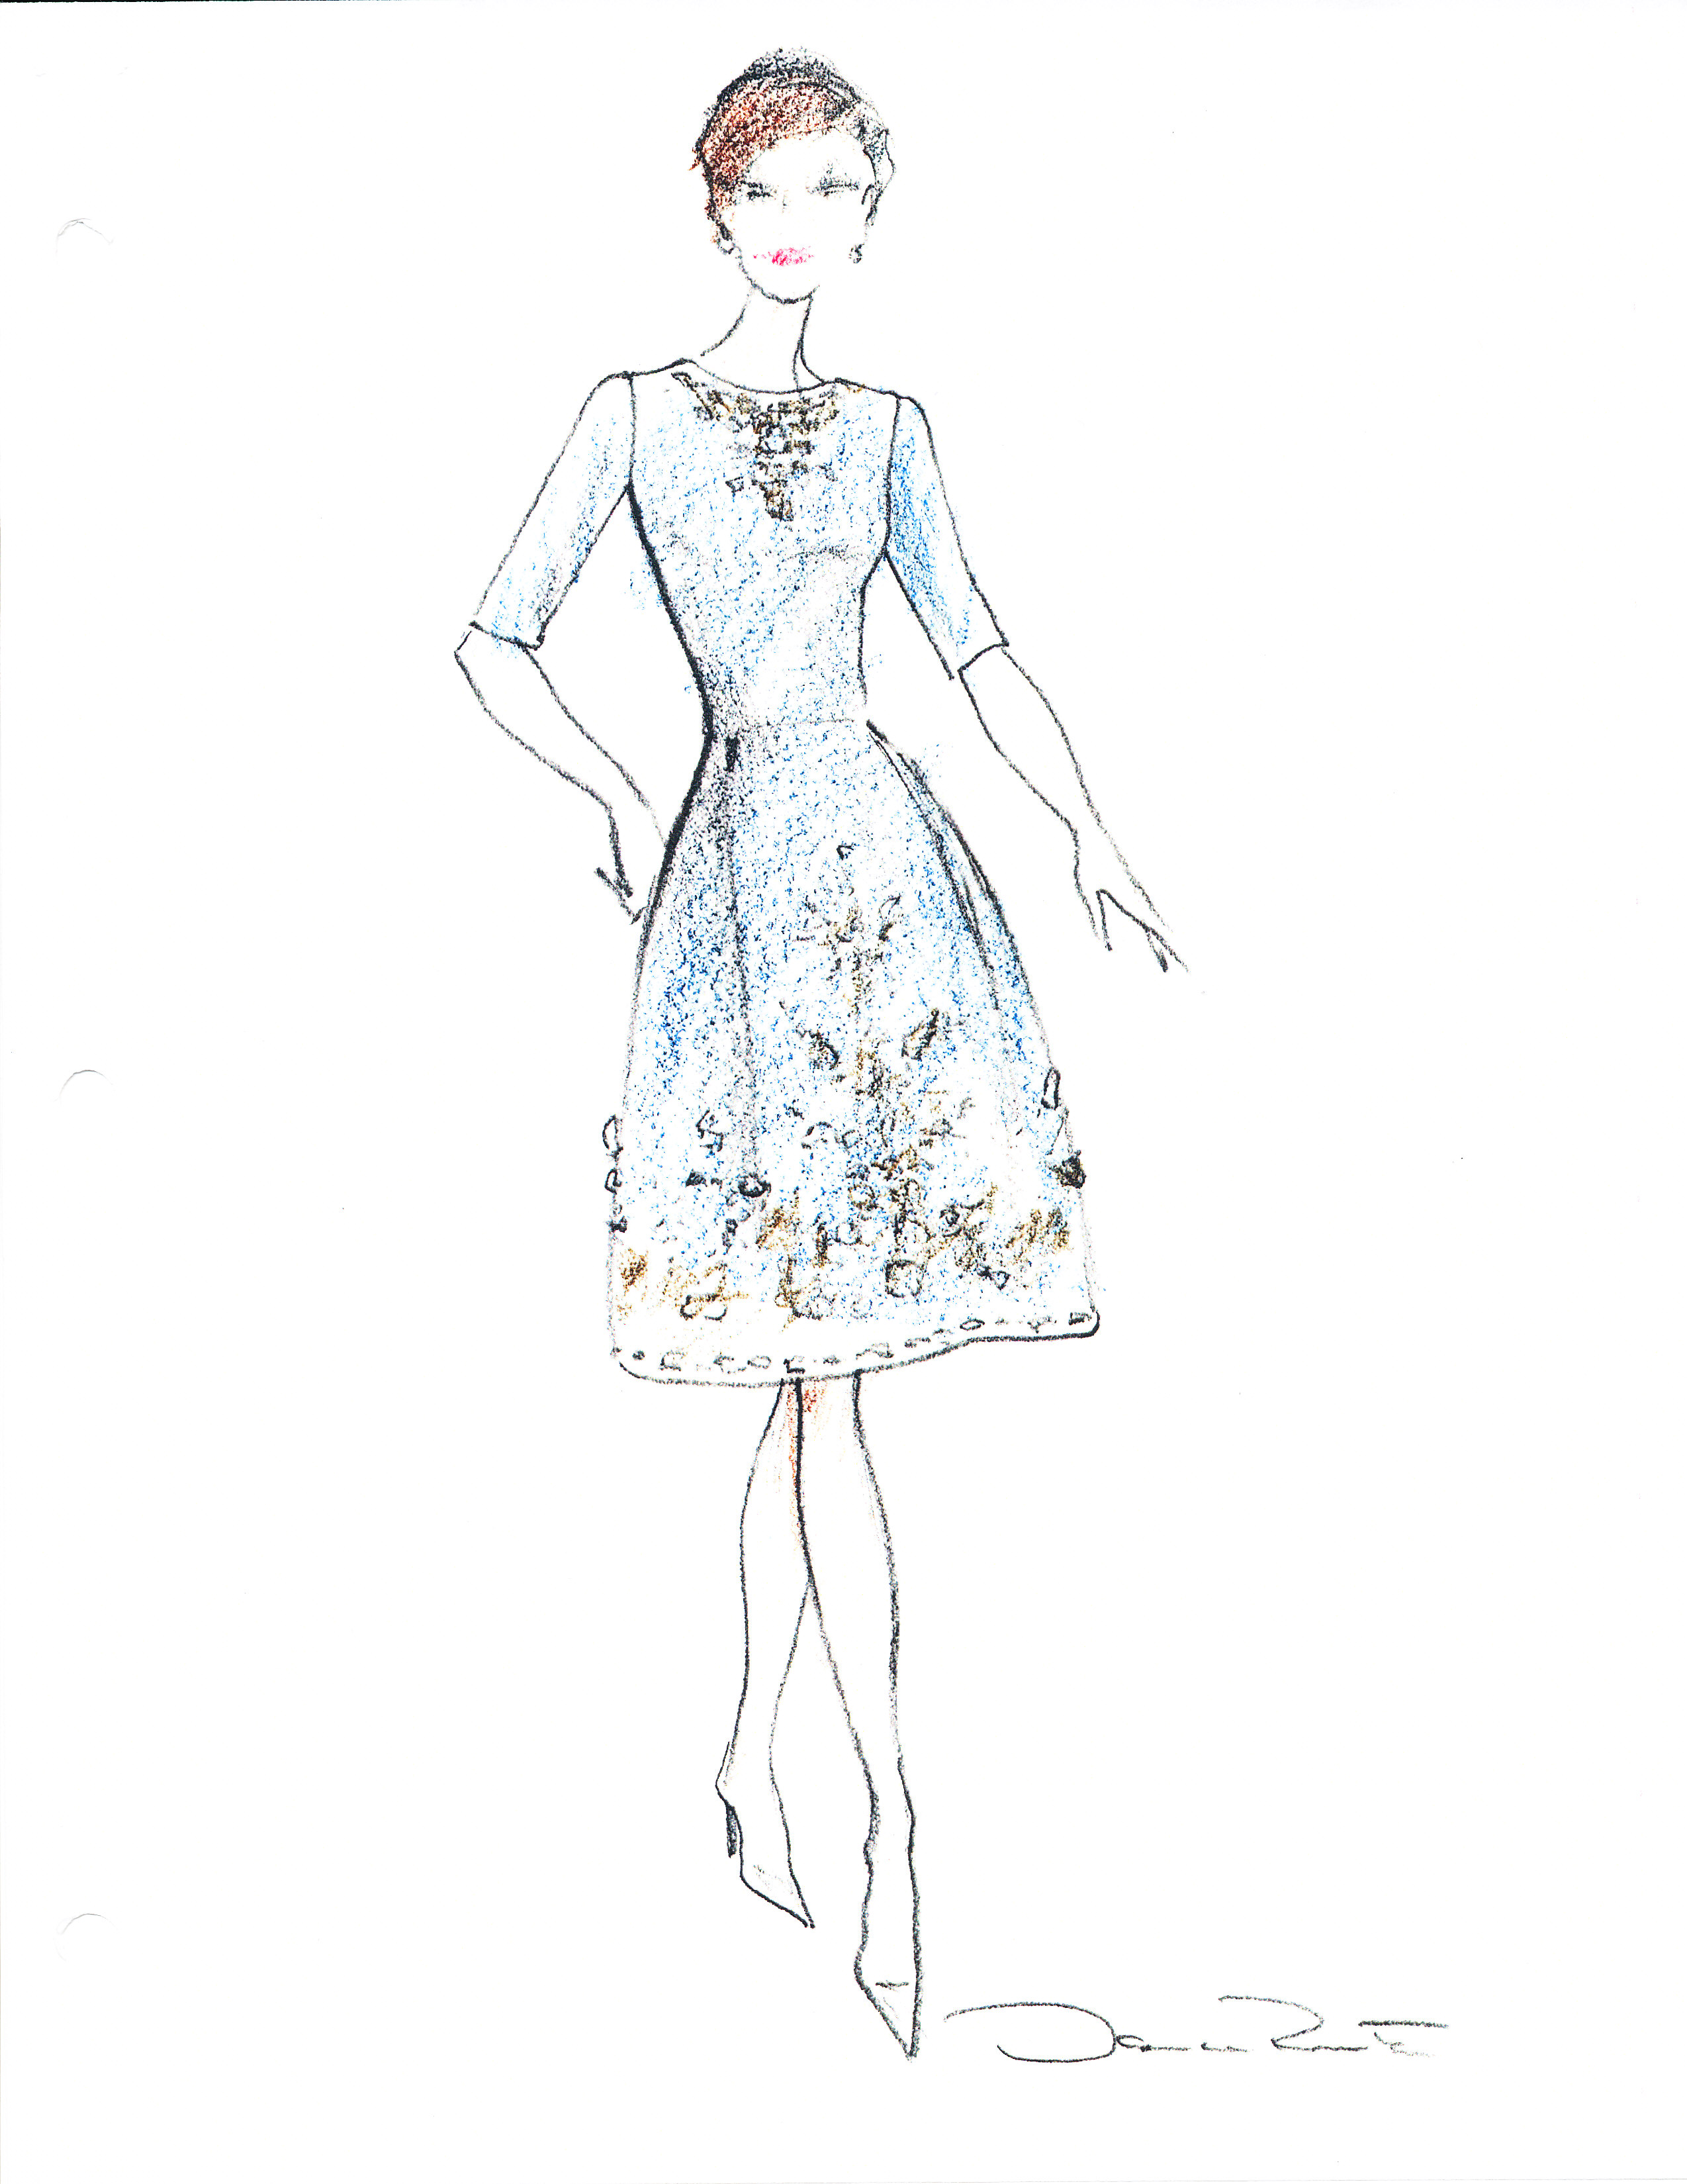 Two sketches by Oscar de la Renta featuring gowns designed for First Lady Laura Bush to wear during the State Dinner for Her Majesty Queen Elizabeth II, May 7, 2007. (Page 2 of 2)